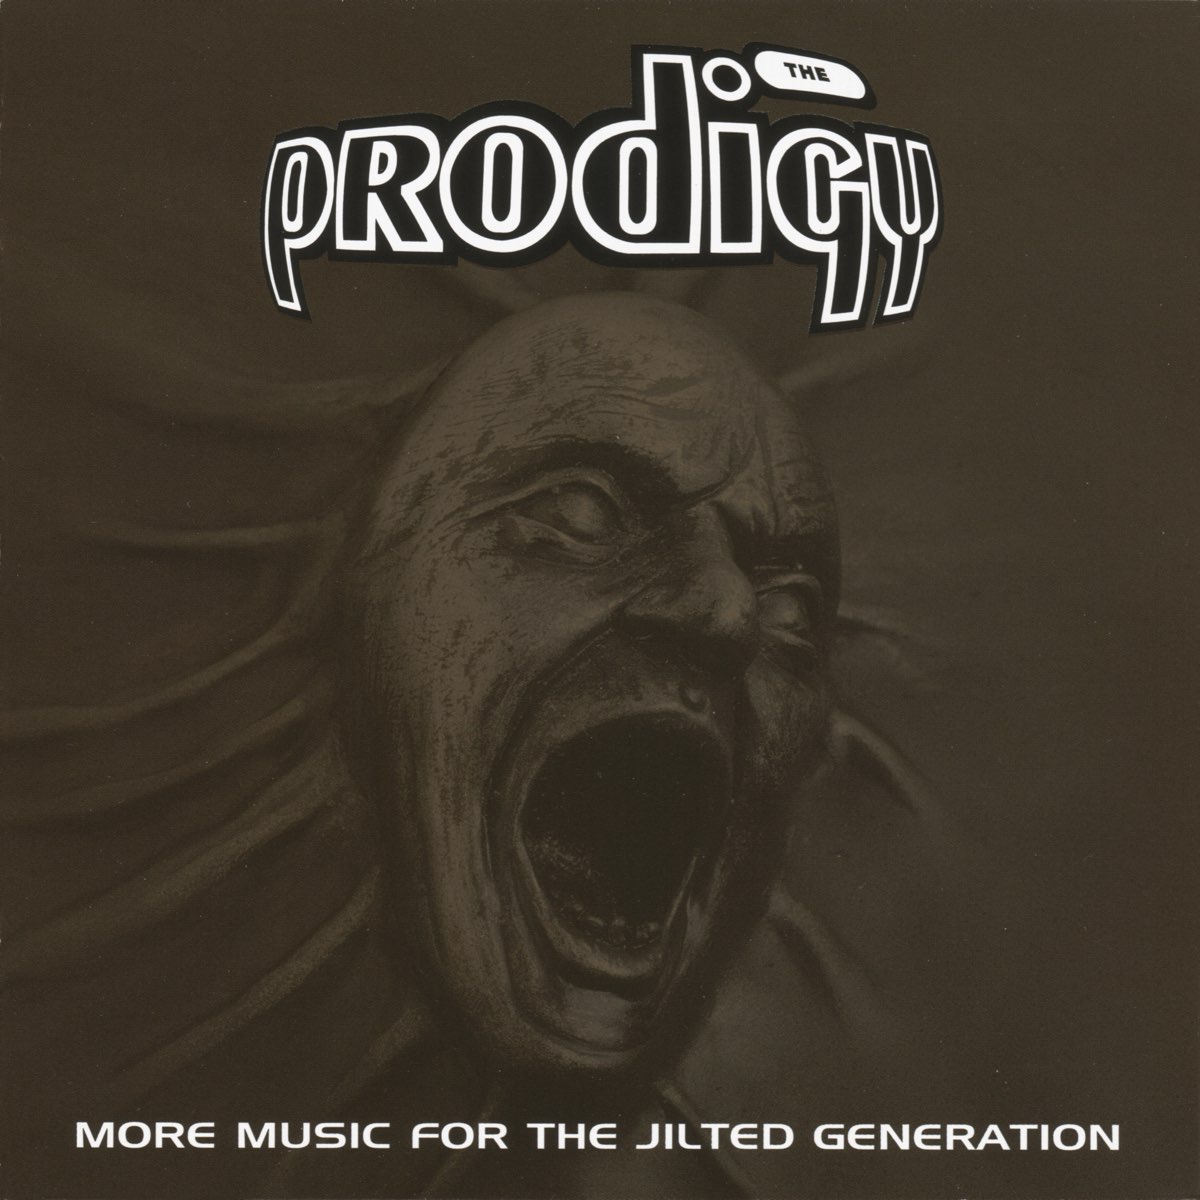 More Music for the Jilted Generation by The Prodigy on Apple Music